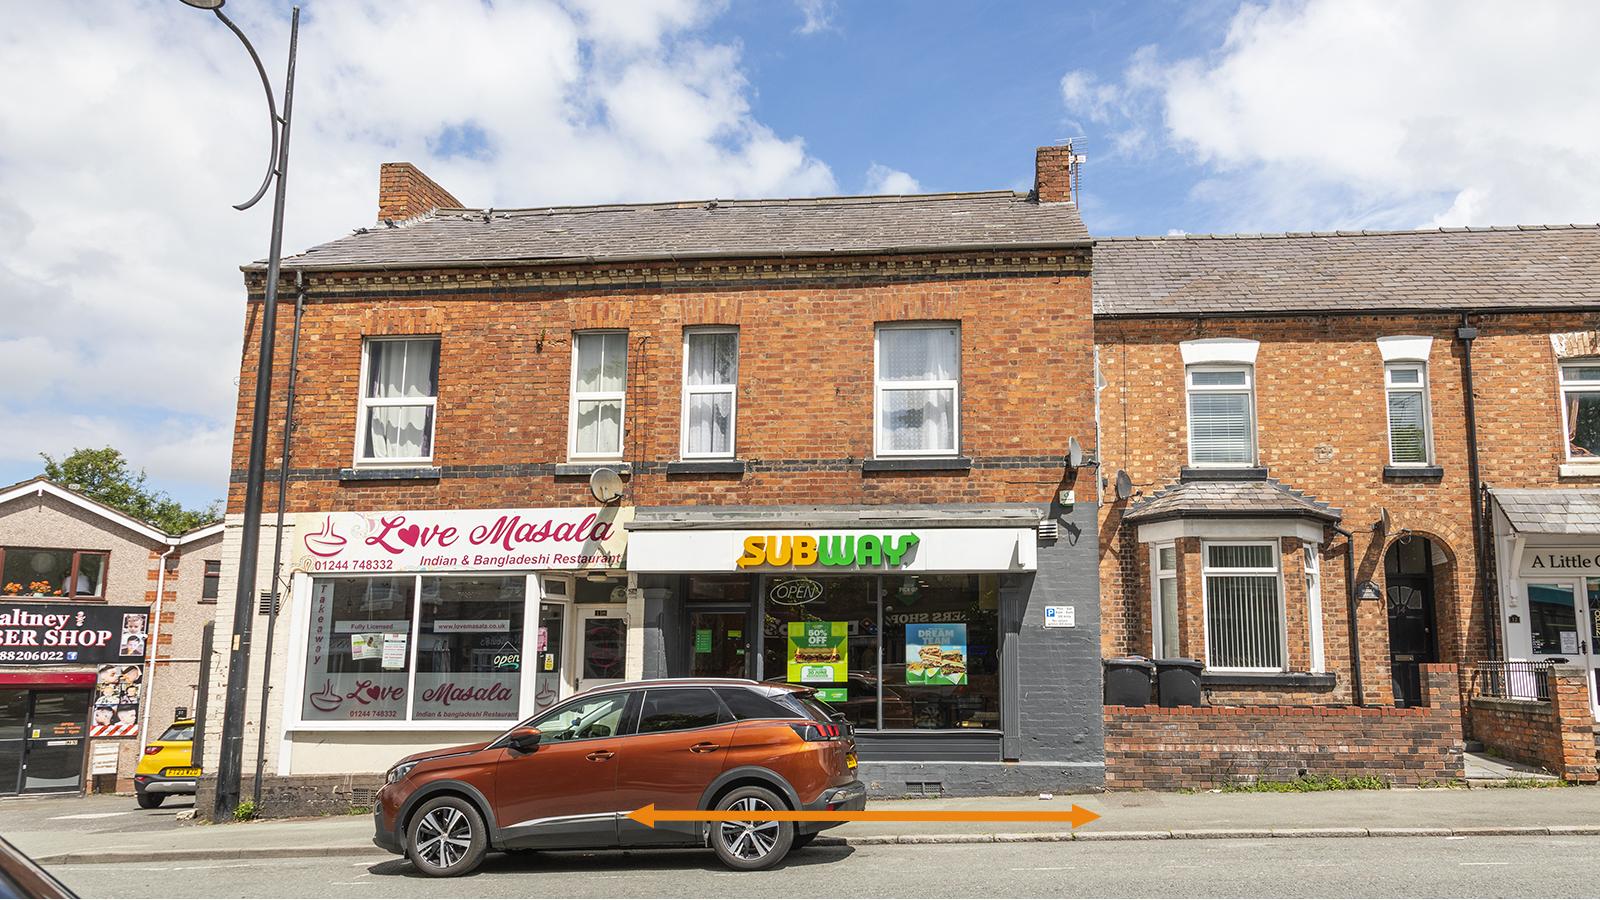 16 Chester Street<br>Saltney<br>Chester<br>Cheshire<br>CH4 8BJ